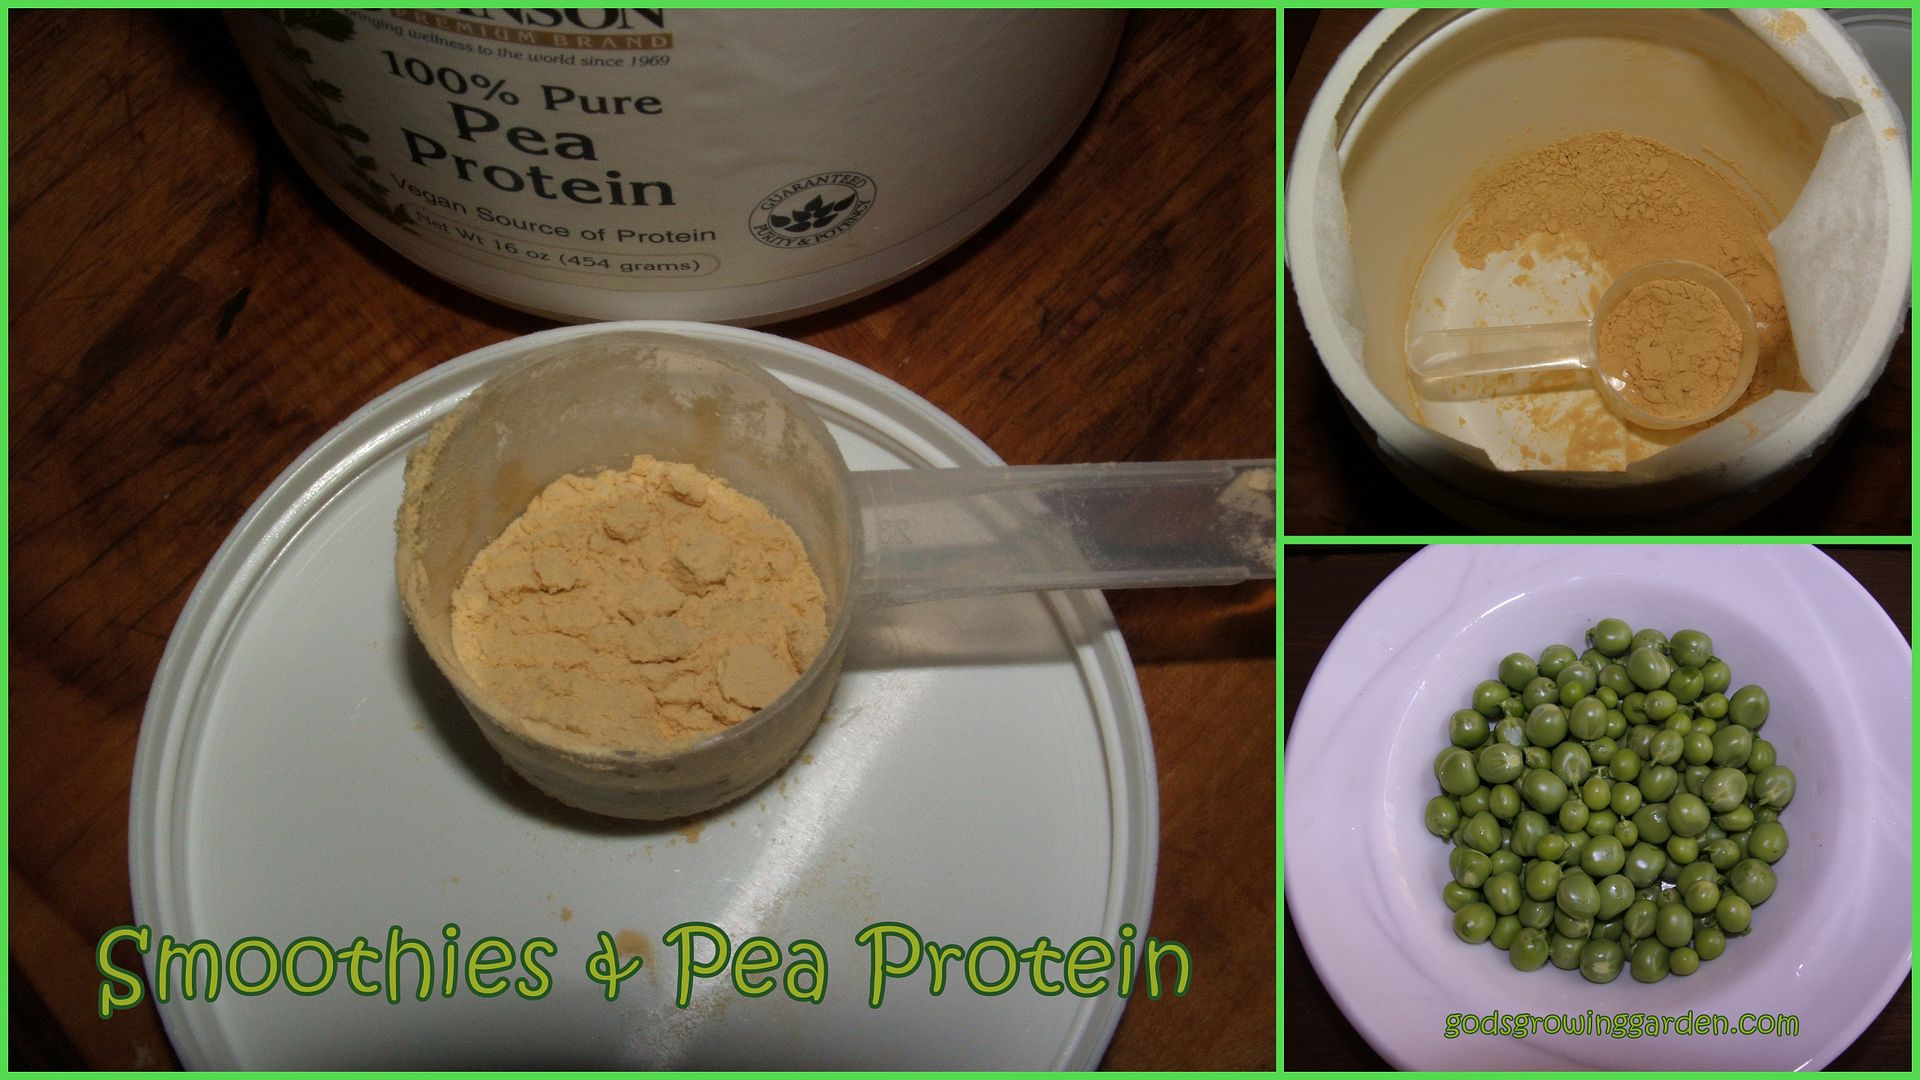 Pea Protein by Angie Ouellette-Tower for godsgrowinggarden.com photo 2012-06-13_zpsf6cc87ca.jpg